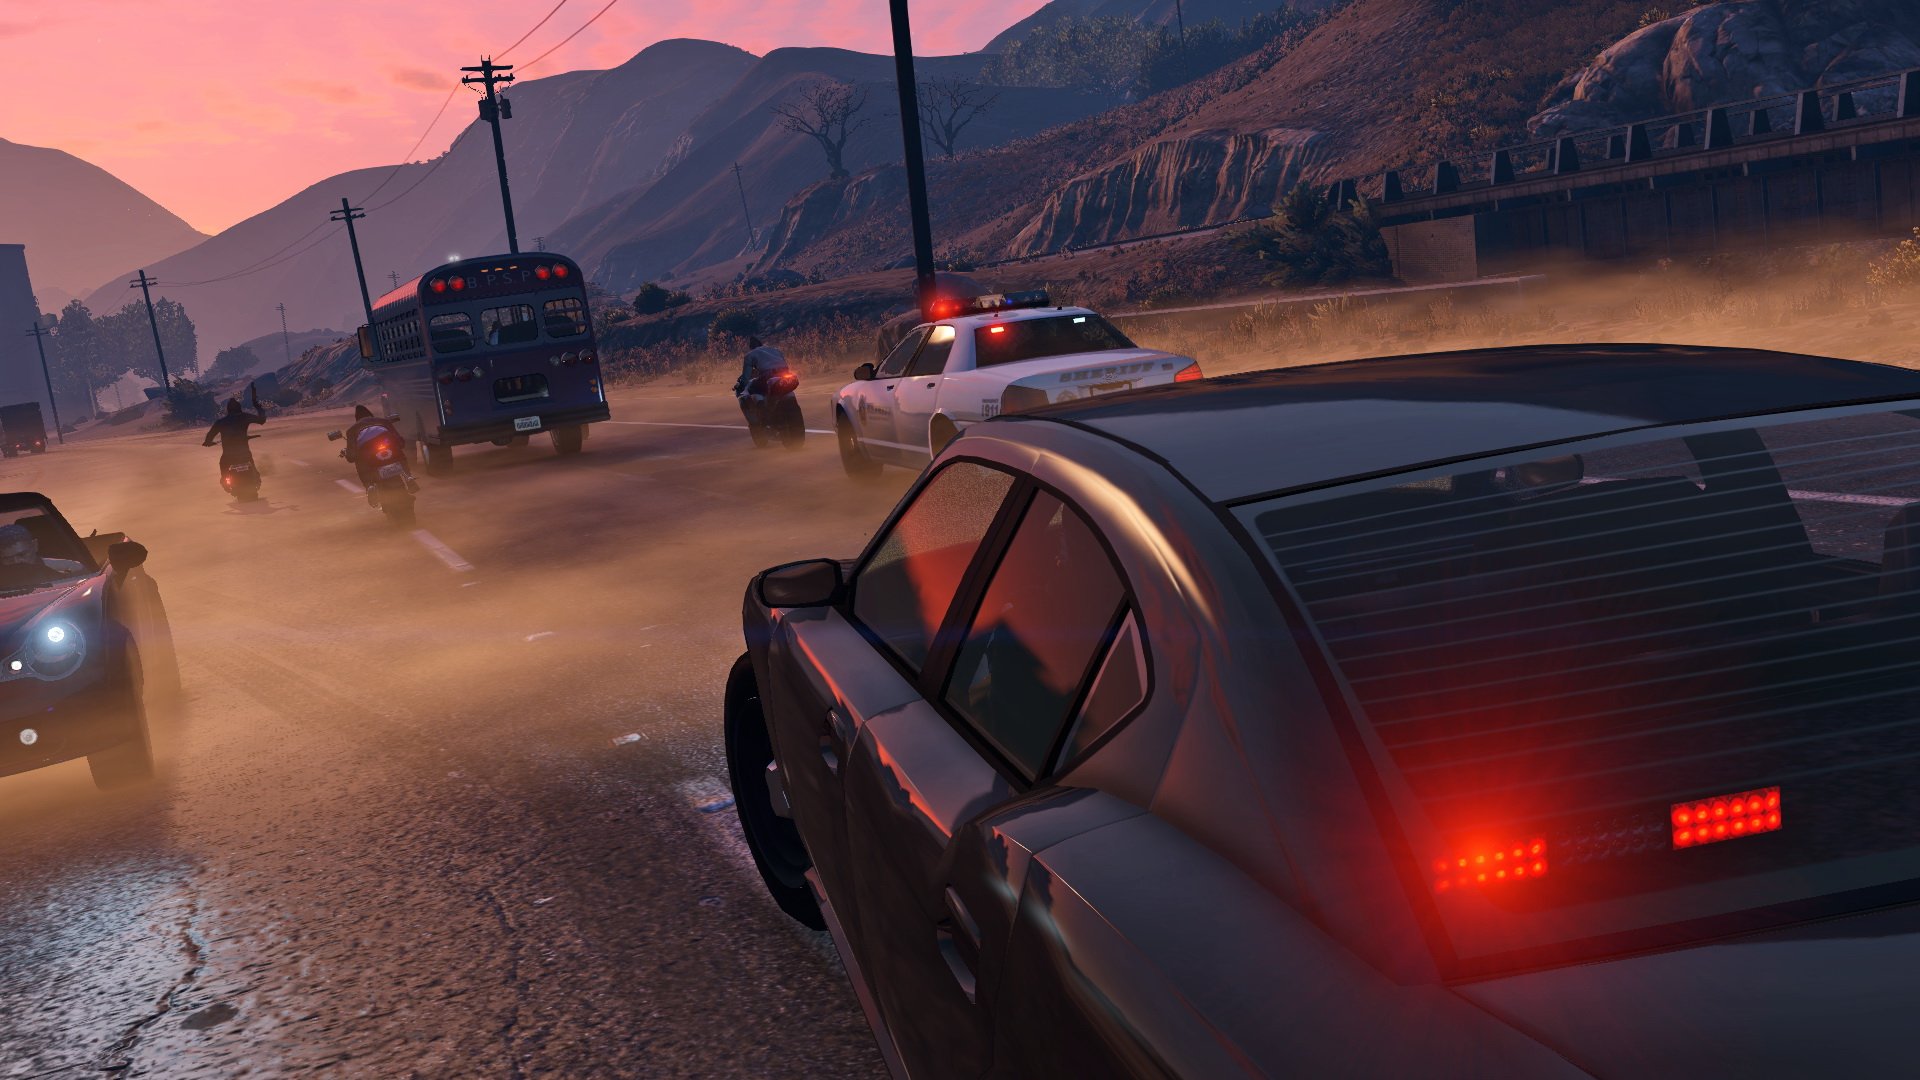 Grand Theft Auto V Wallpapers, Pictures, Images